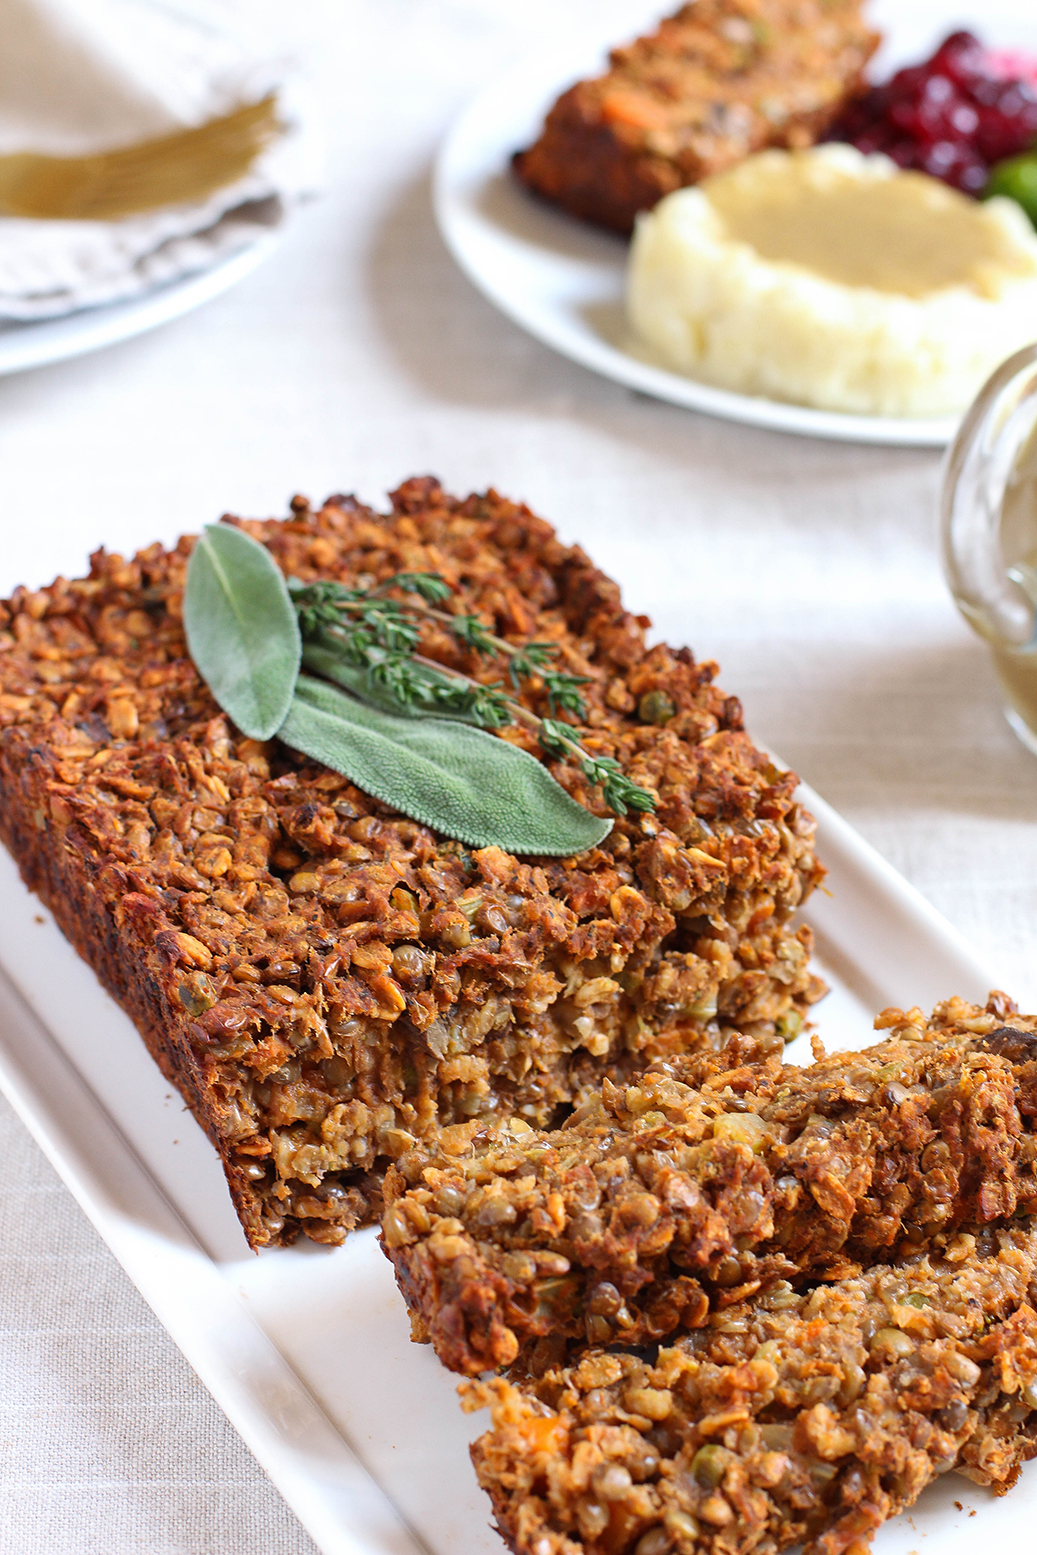 Vegan & gluten free lentil loaf with classic brown onion gravy